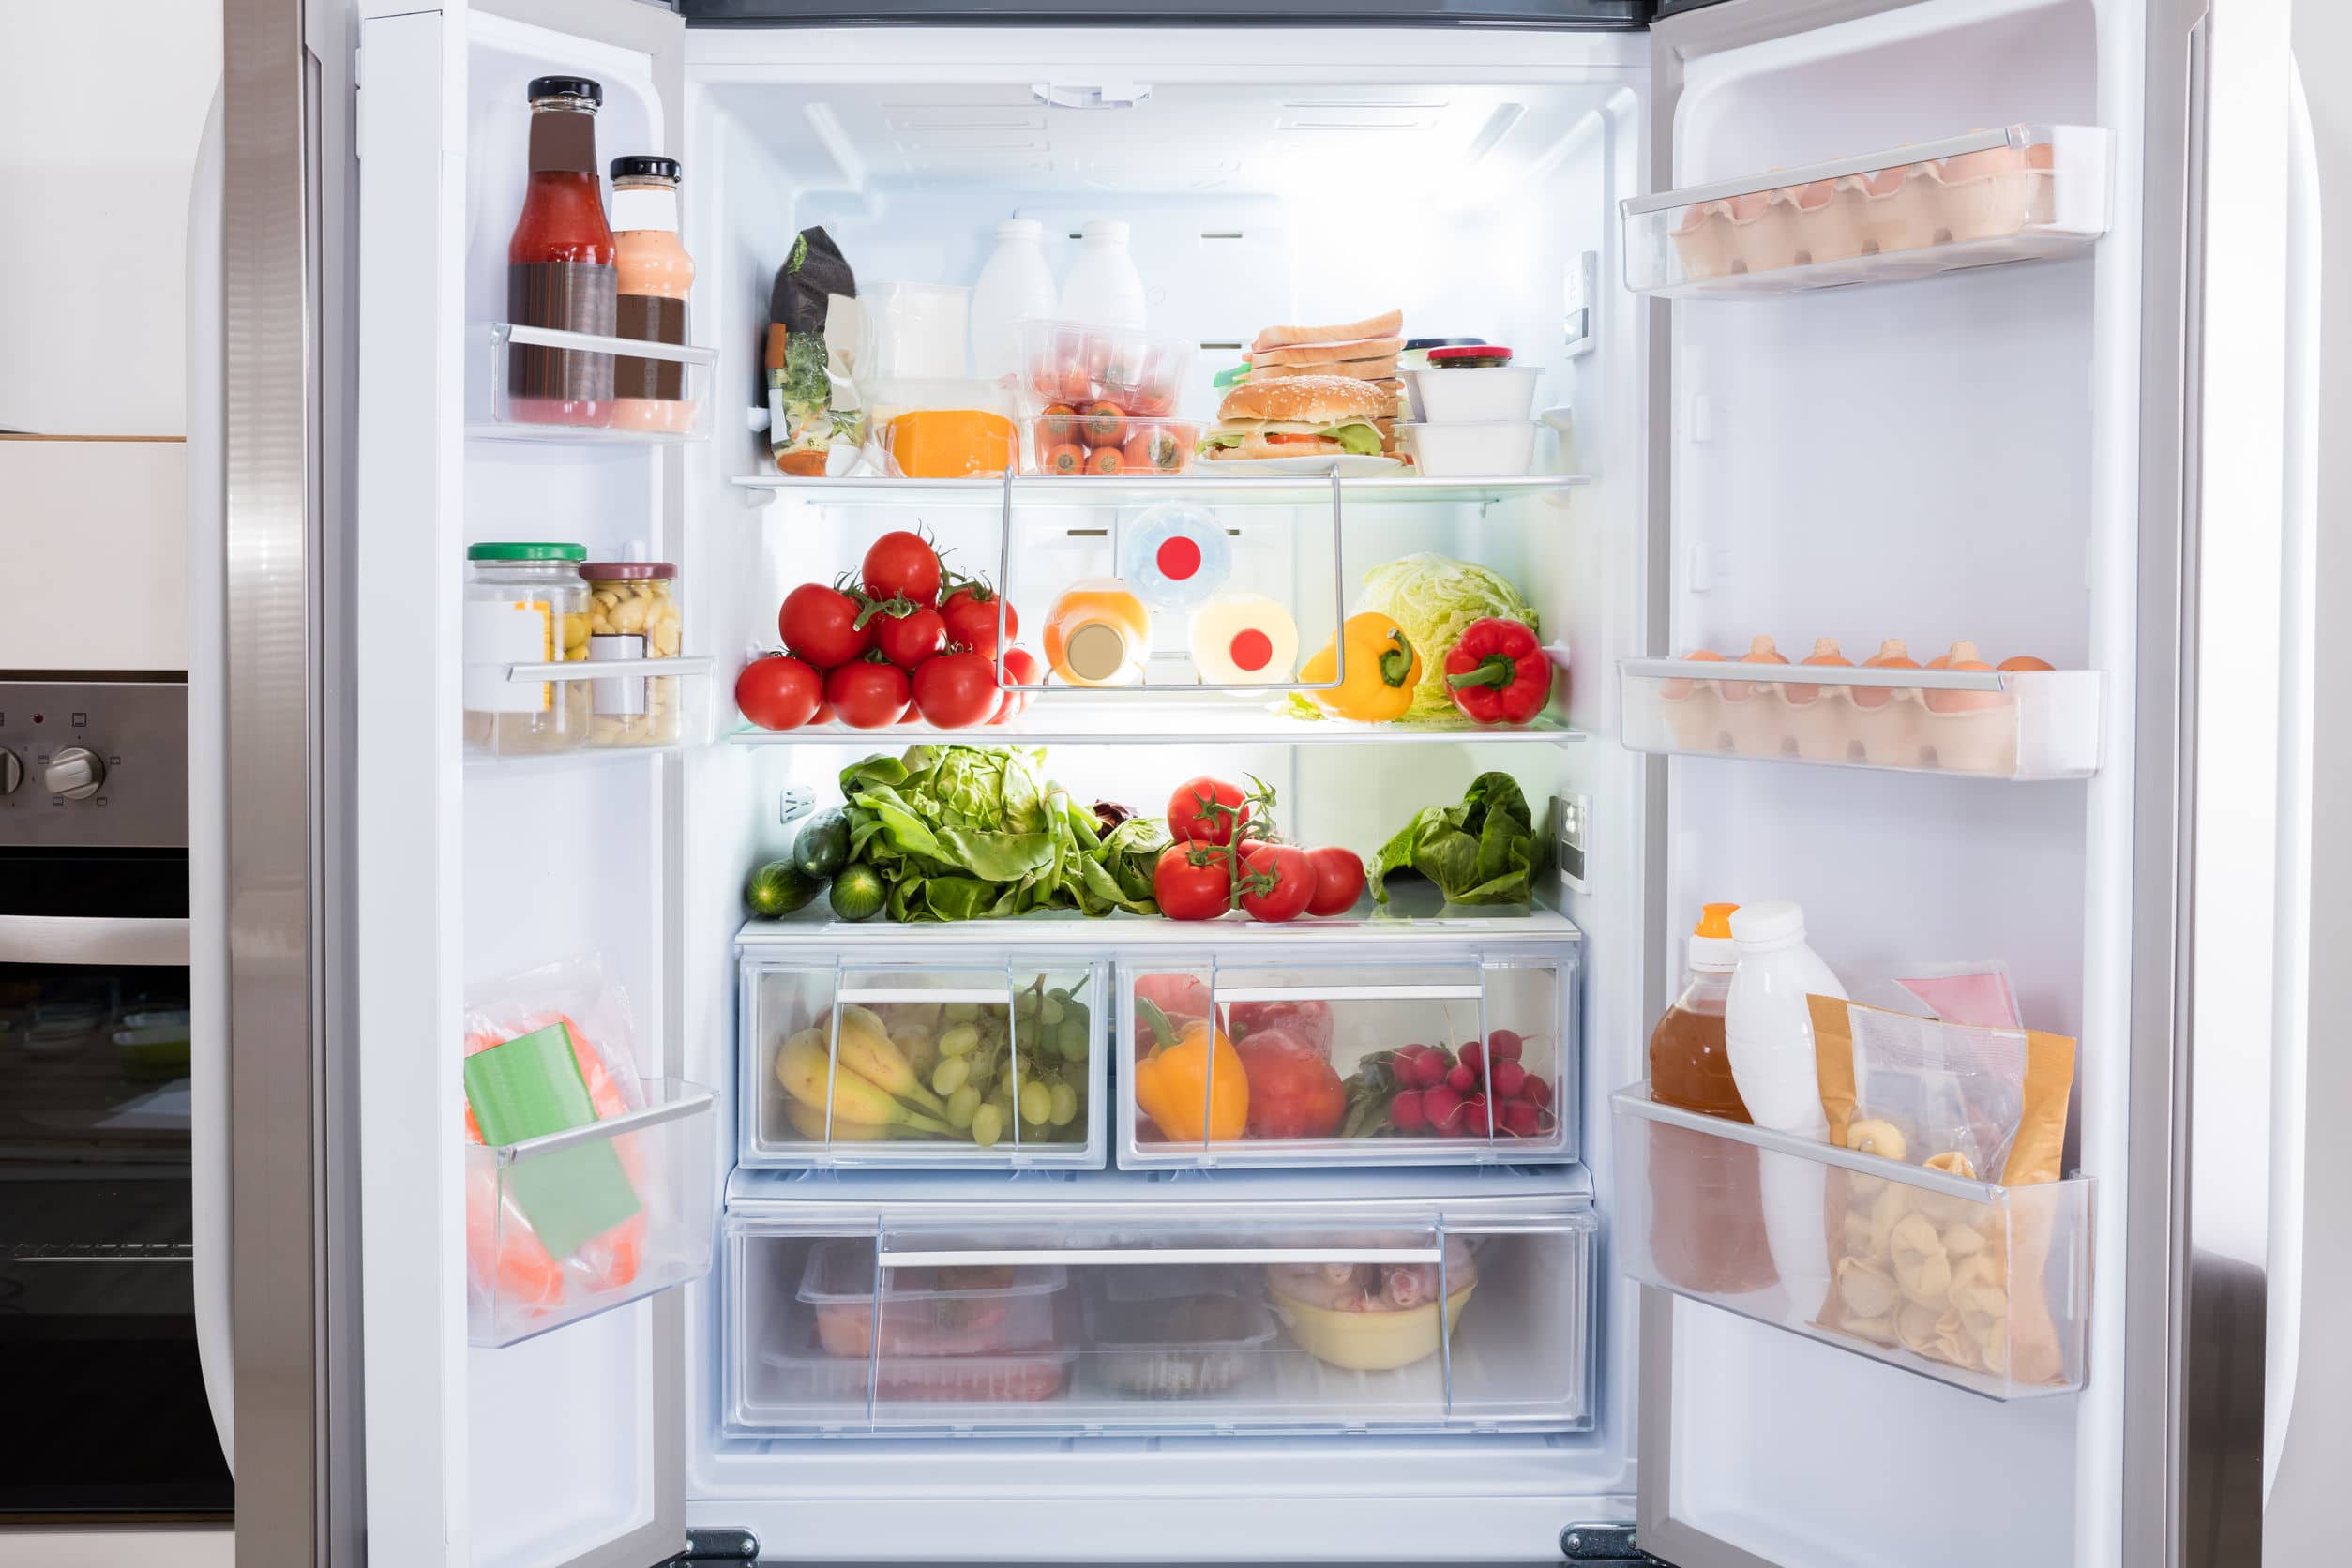 Before the holidays take time to clean out your stocked fridge. 